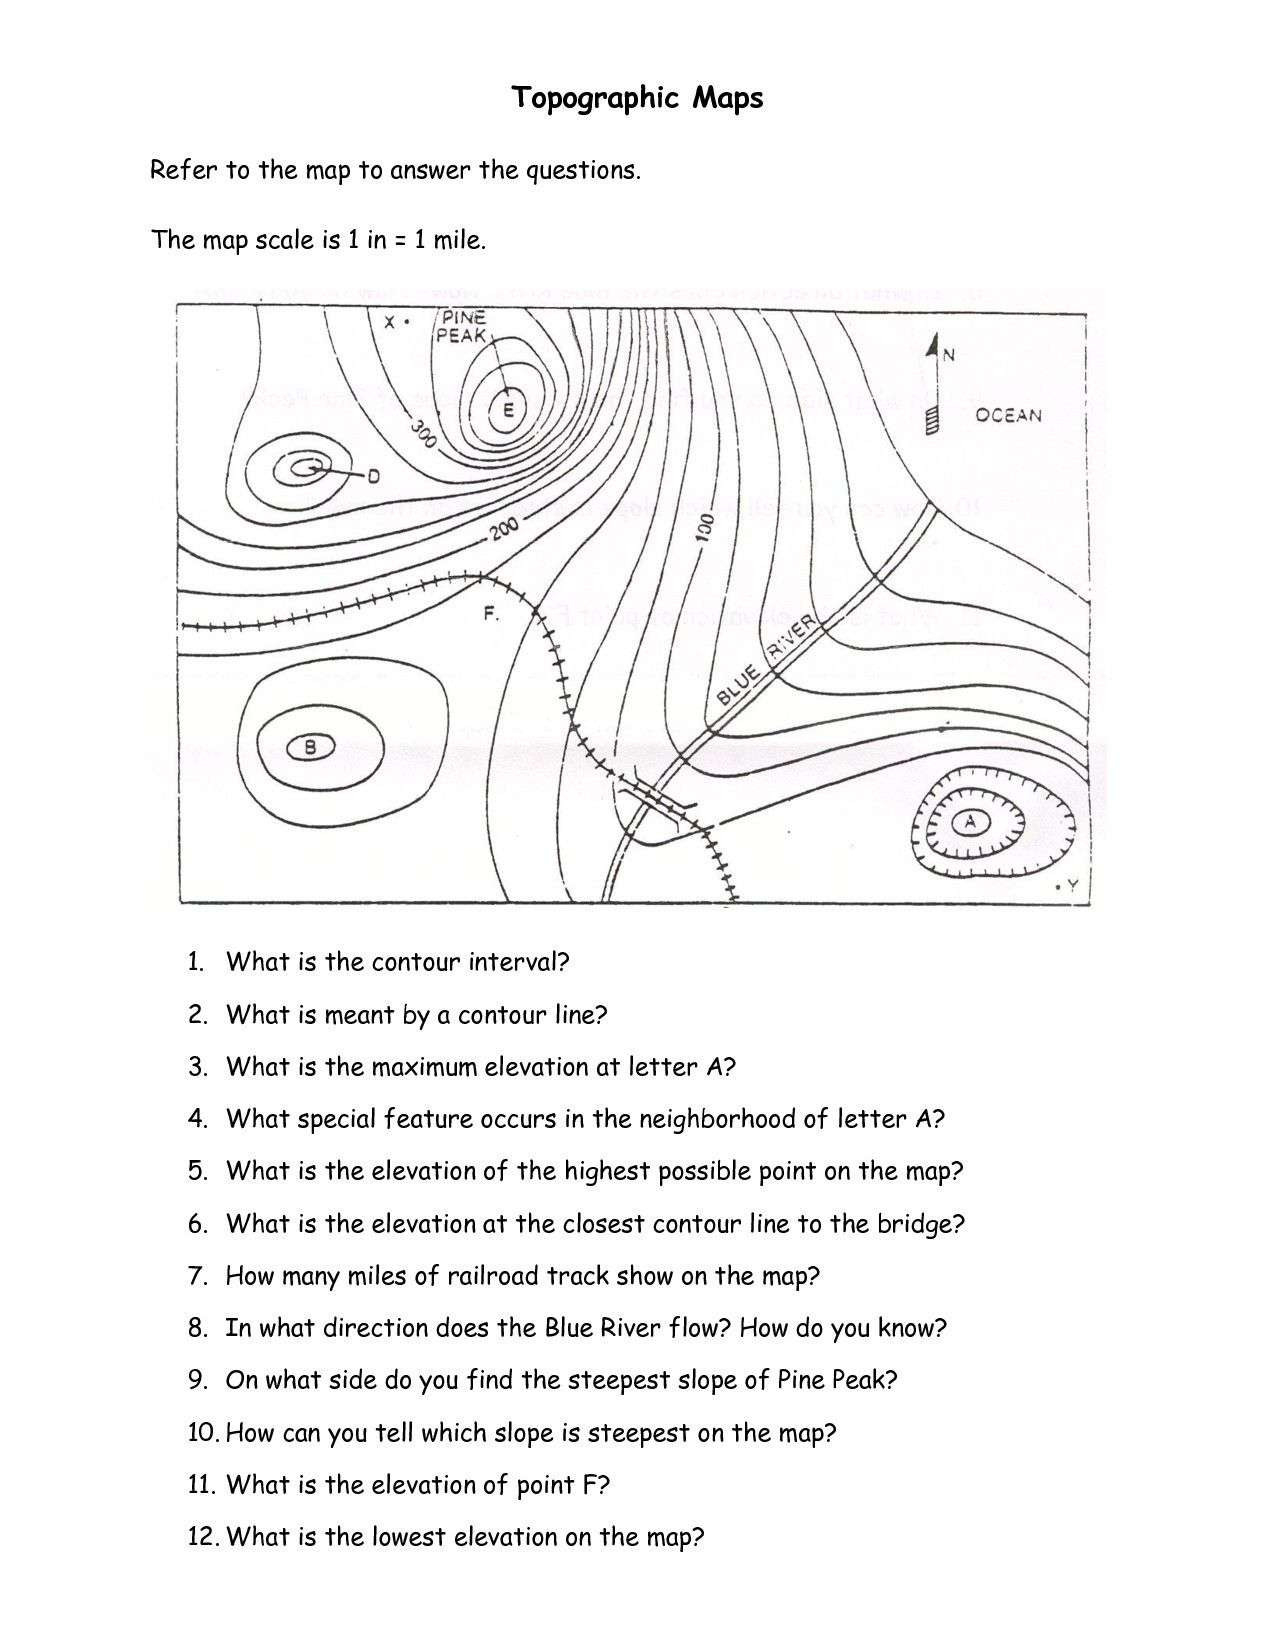 Topographic Map Worksheet Answers Worksheet Idea — db-excel.com